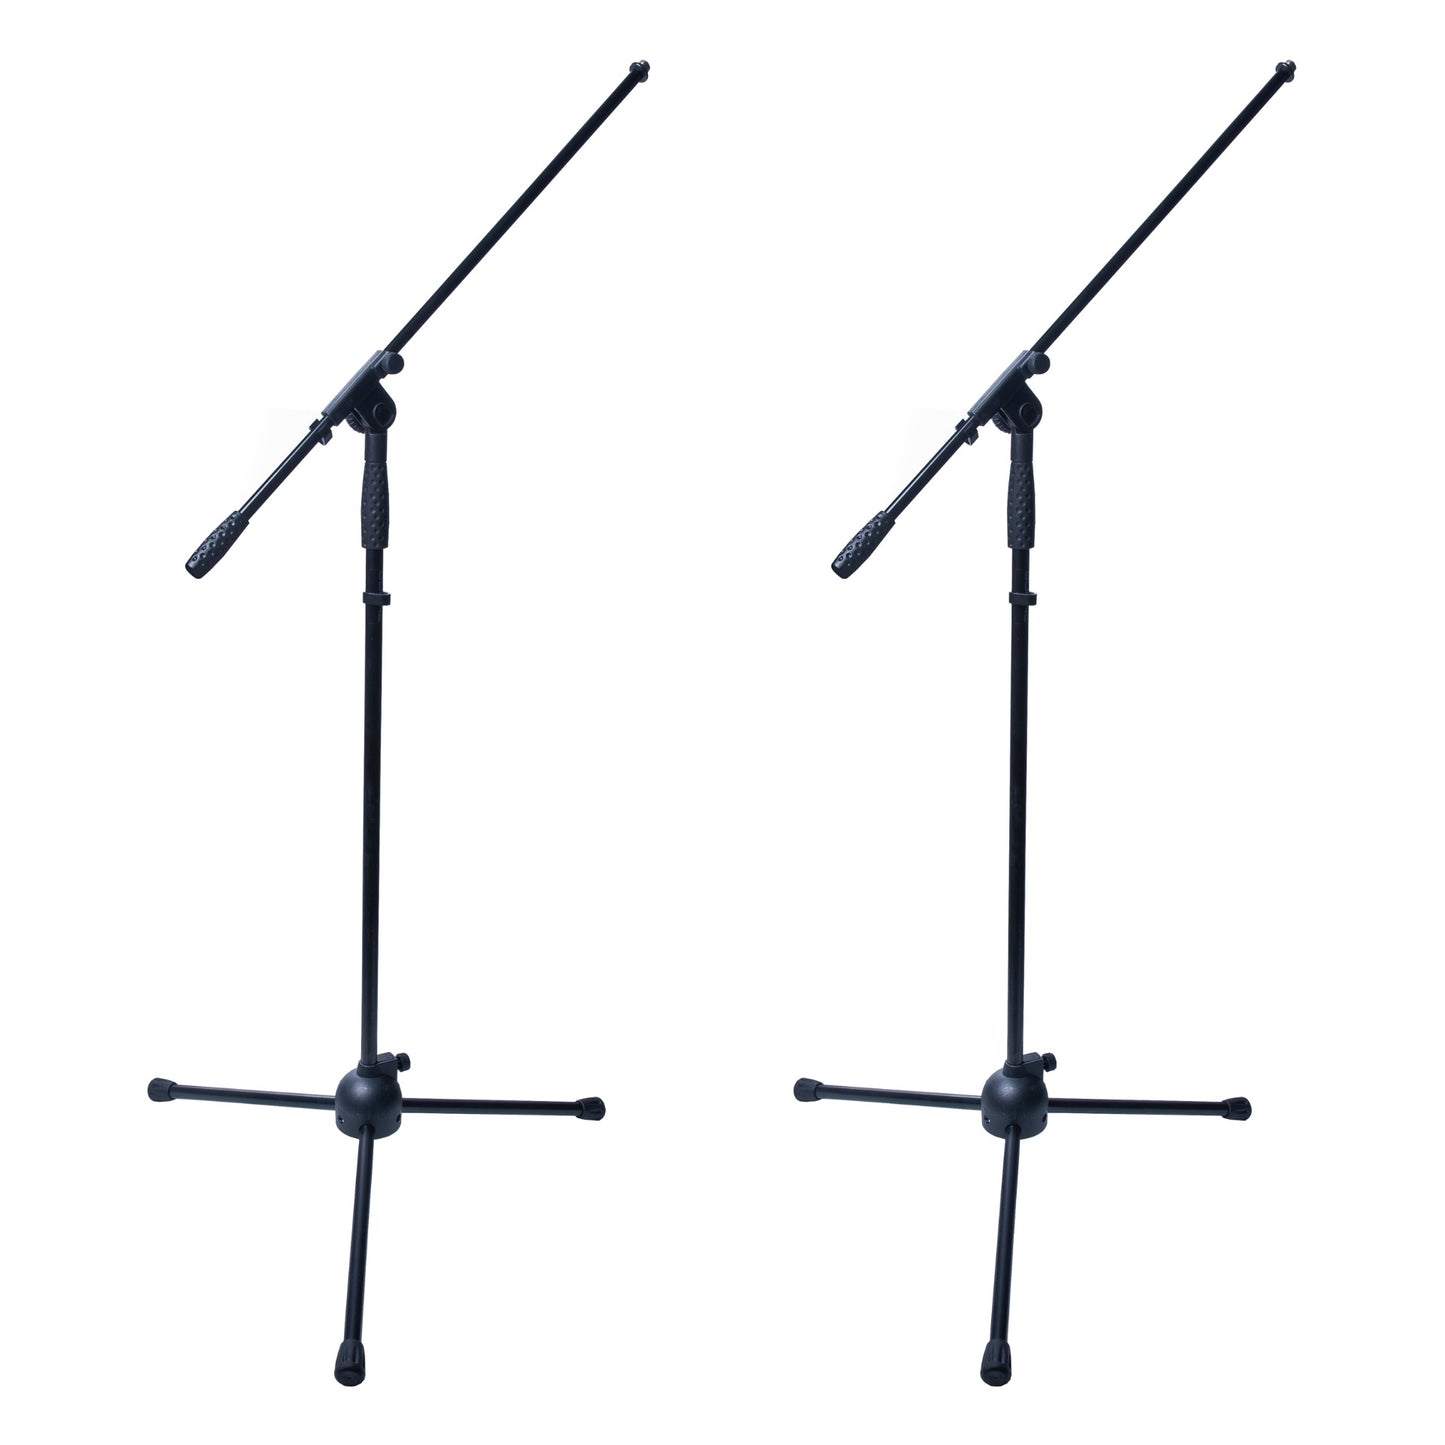 Buhne Industries BN180 Microphone Stand